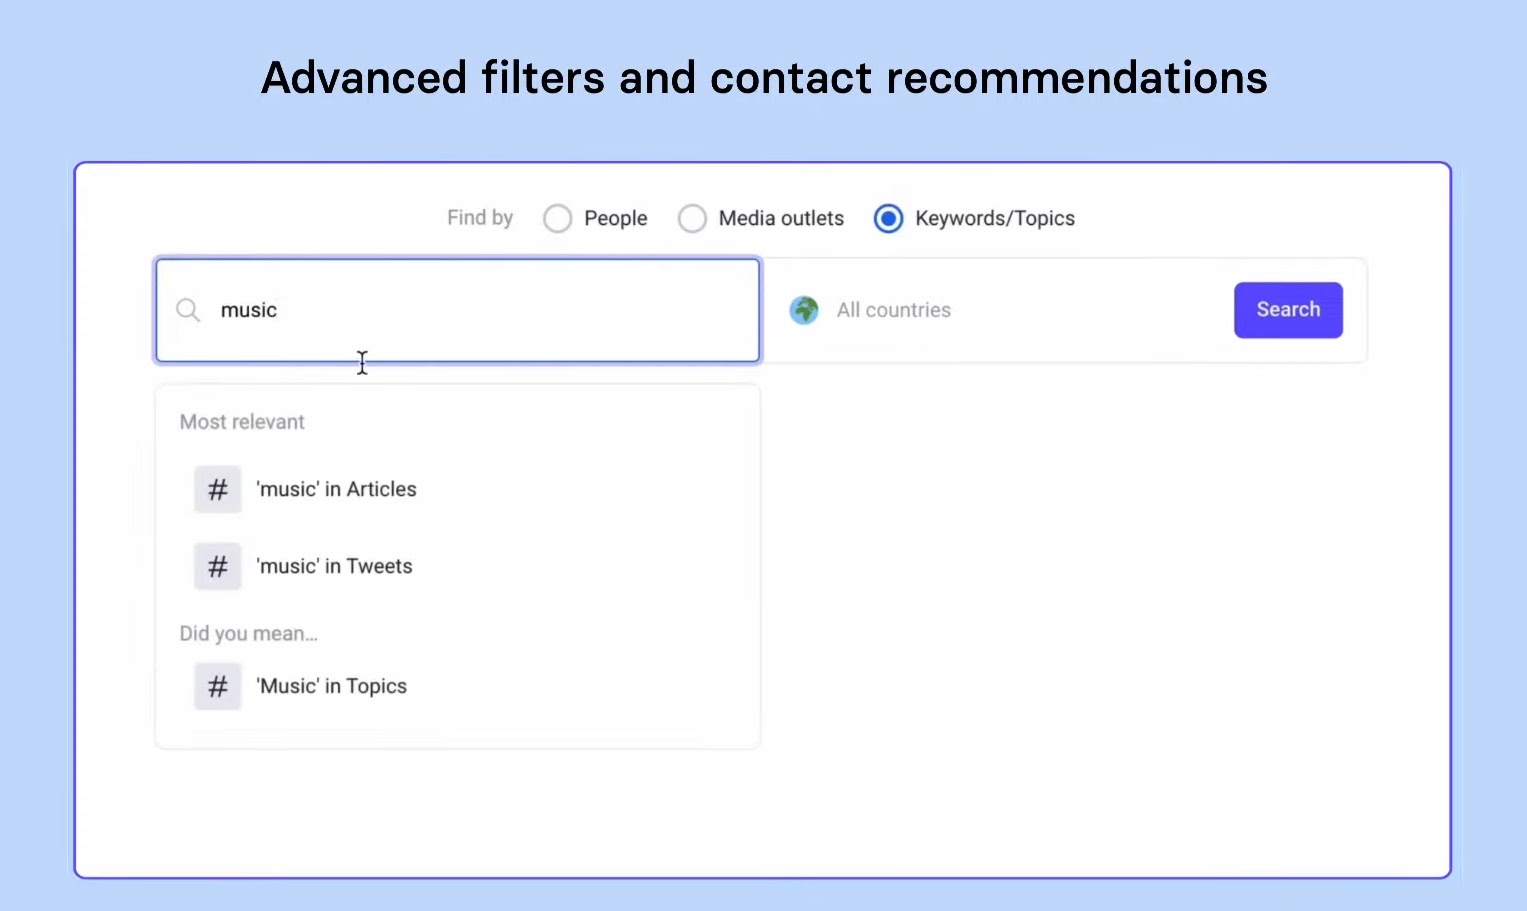 Advanced filters and contact recommendations in Prowly